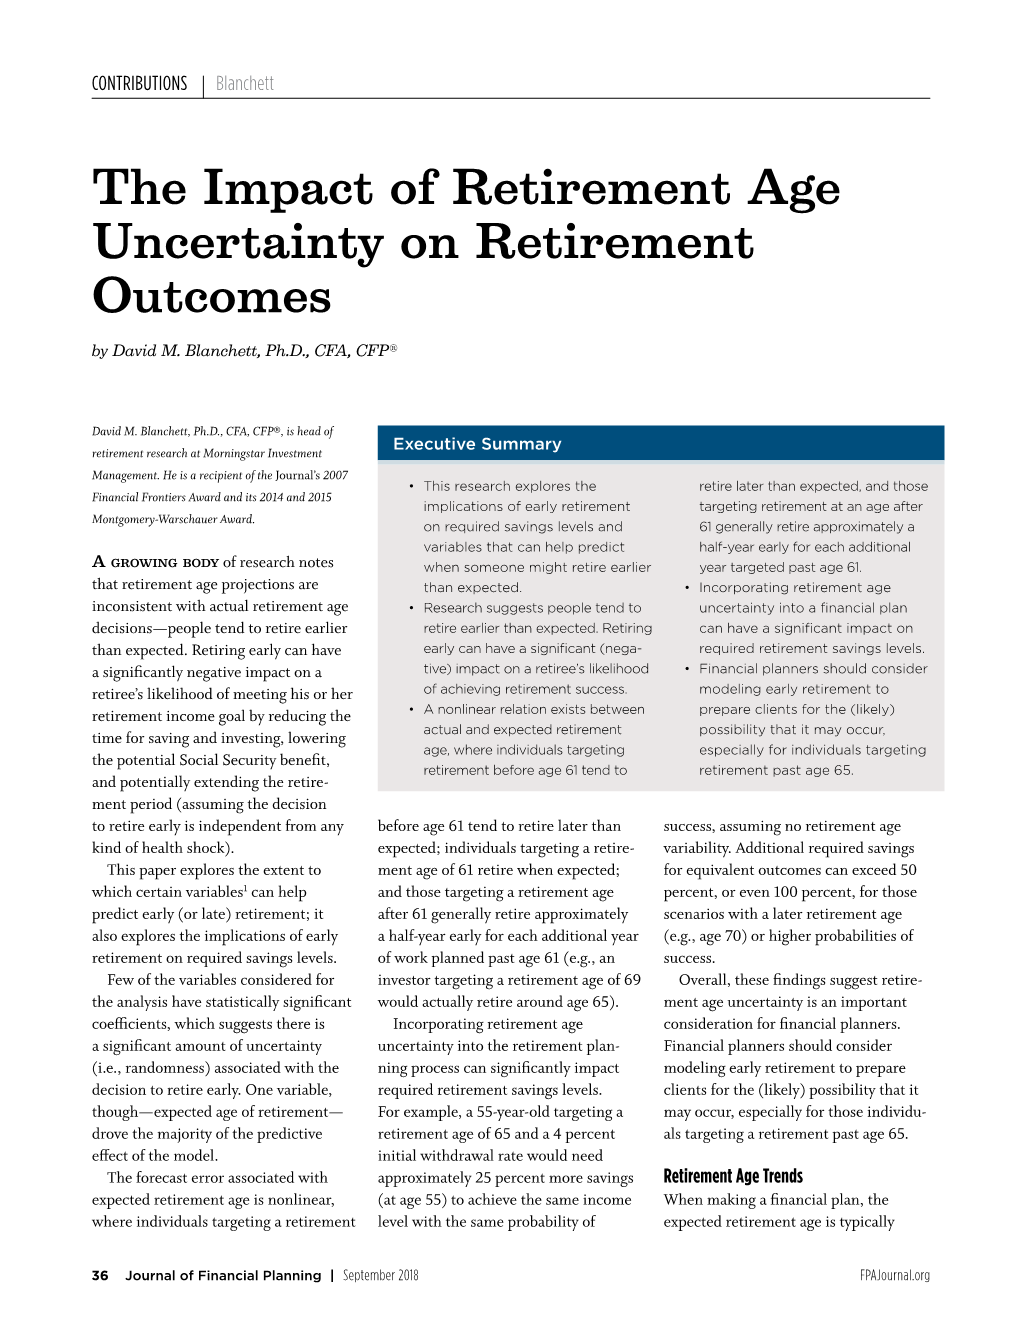 The Impact of Retirement Age Uncertainty on Retirement Outcomes by David M